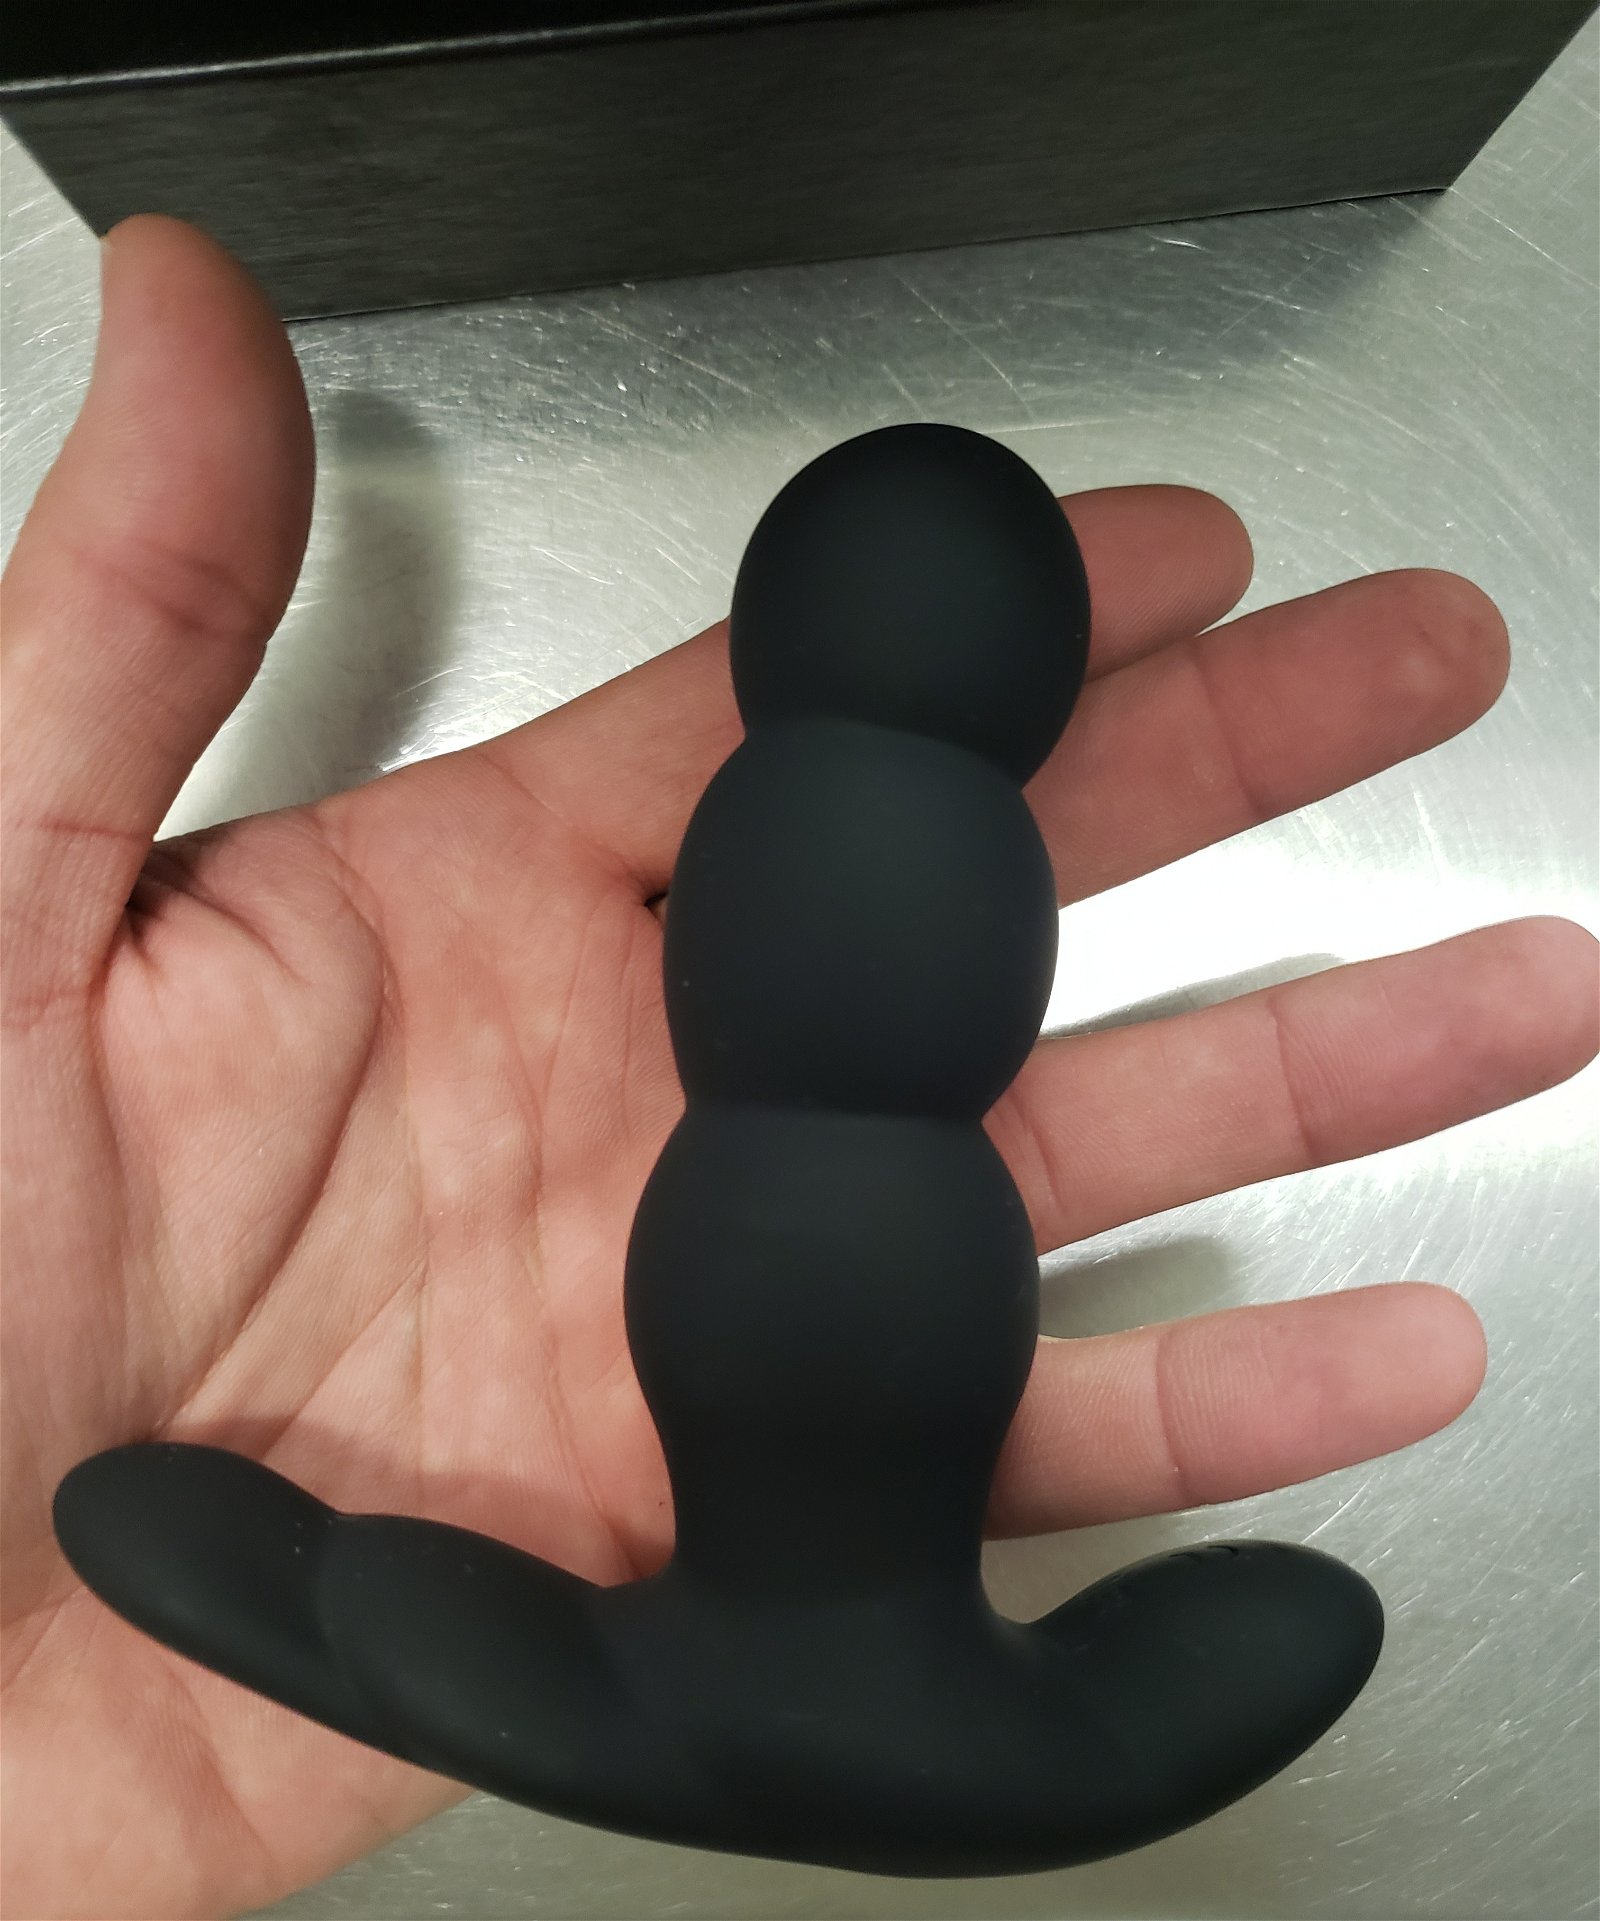 Photo by Wiseguy with the username @Wiseguy, who is a verified user,  February 22, 2020 at 6:17 PM. The post is about the topic Butt Plug and the text says 'I got a new vibrating and rotating butt plug. I can't wait to wear it while I work out tonight'